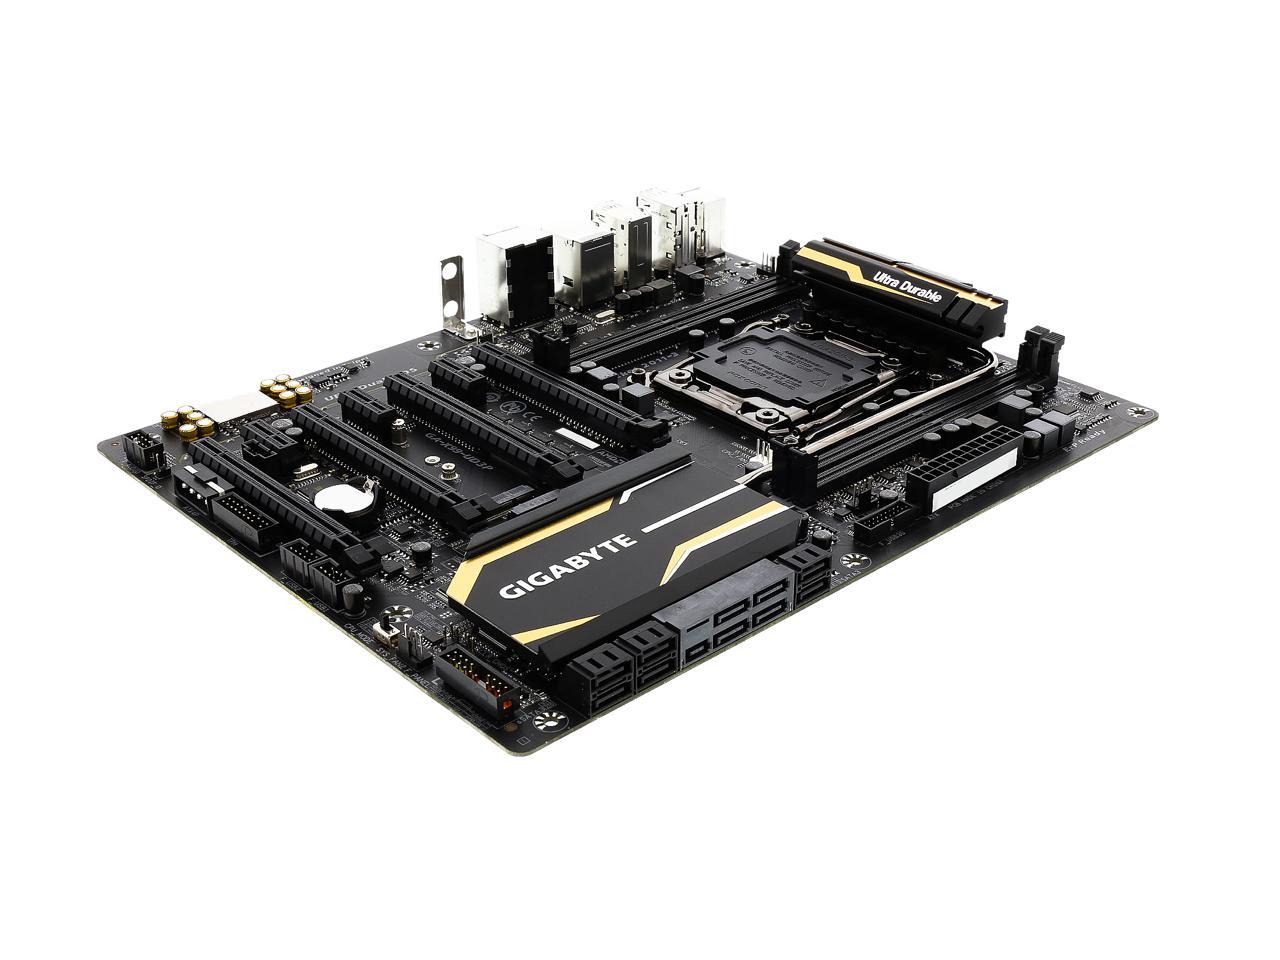 PARTS-QUICK Brand 4GB Memory for Gigabyte GA-X99-UD3P Motherboard DDR4 PC4-17000 2133 MHz Non-ECC DIMM